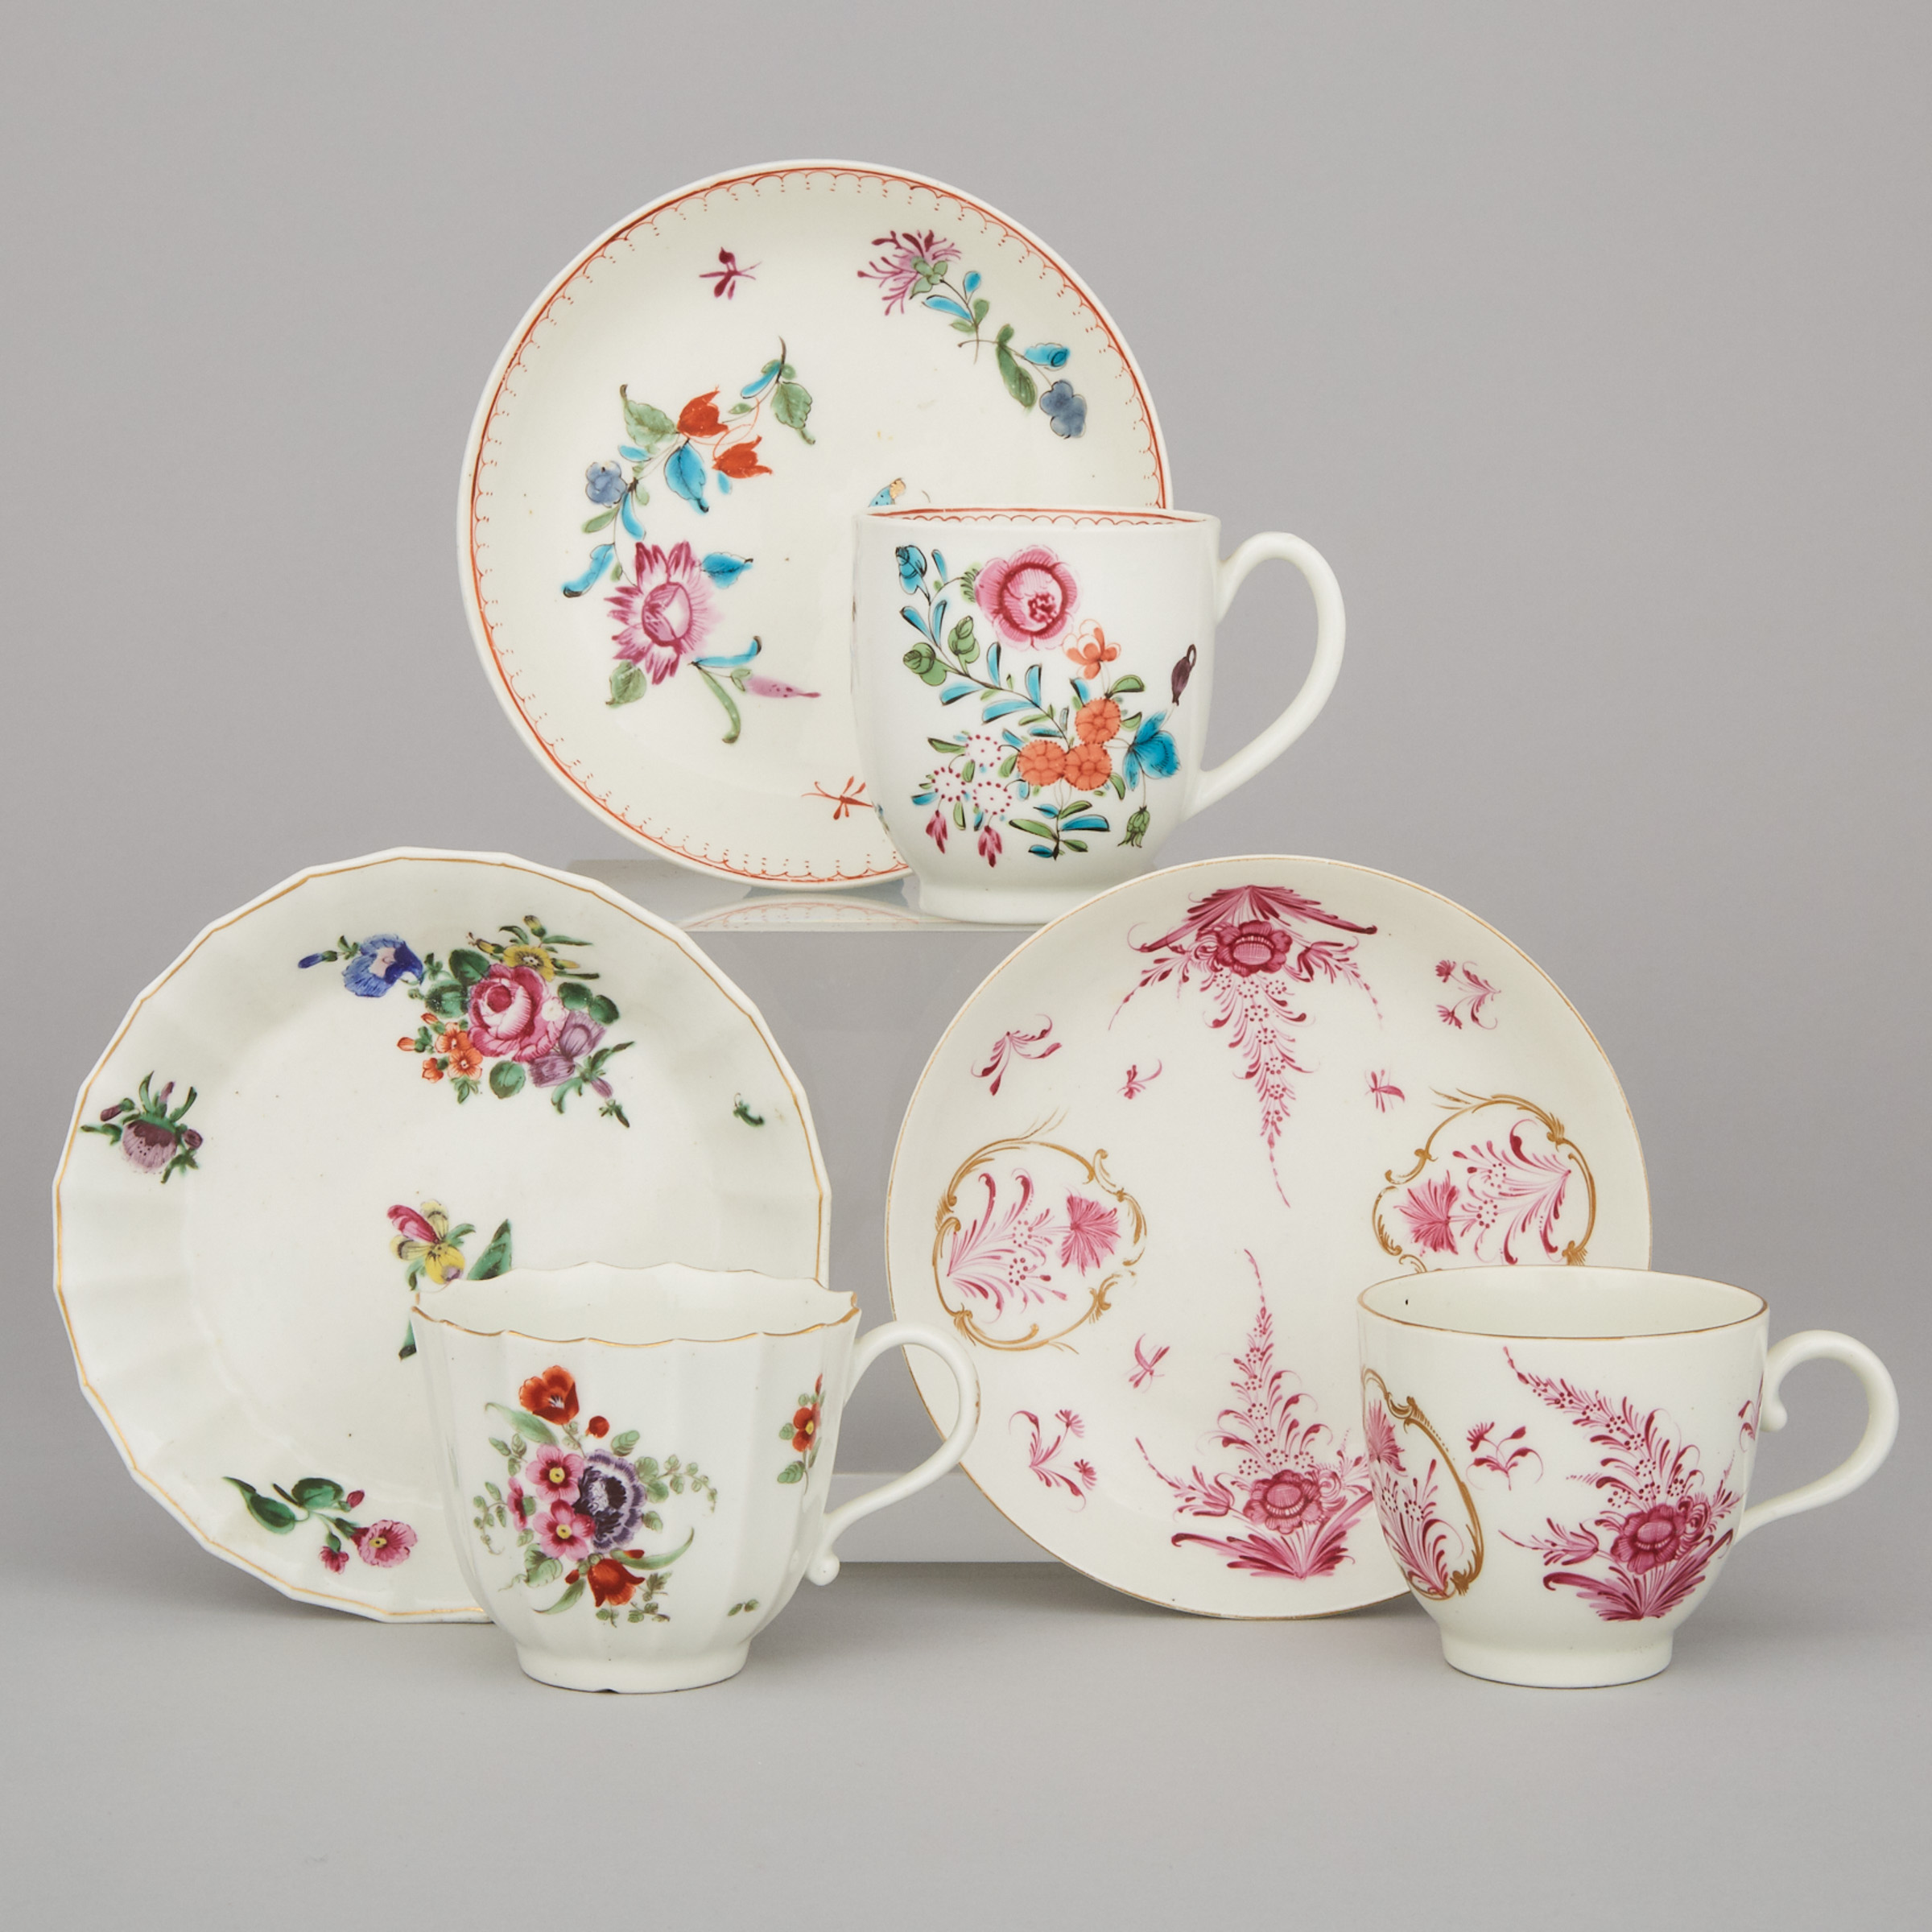 Three Worcester Floral Decorated Cups and Saucers, 18th century